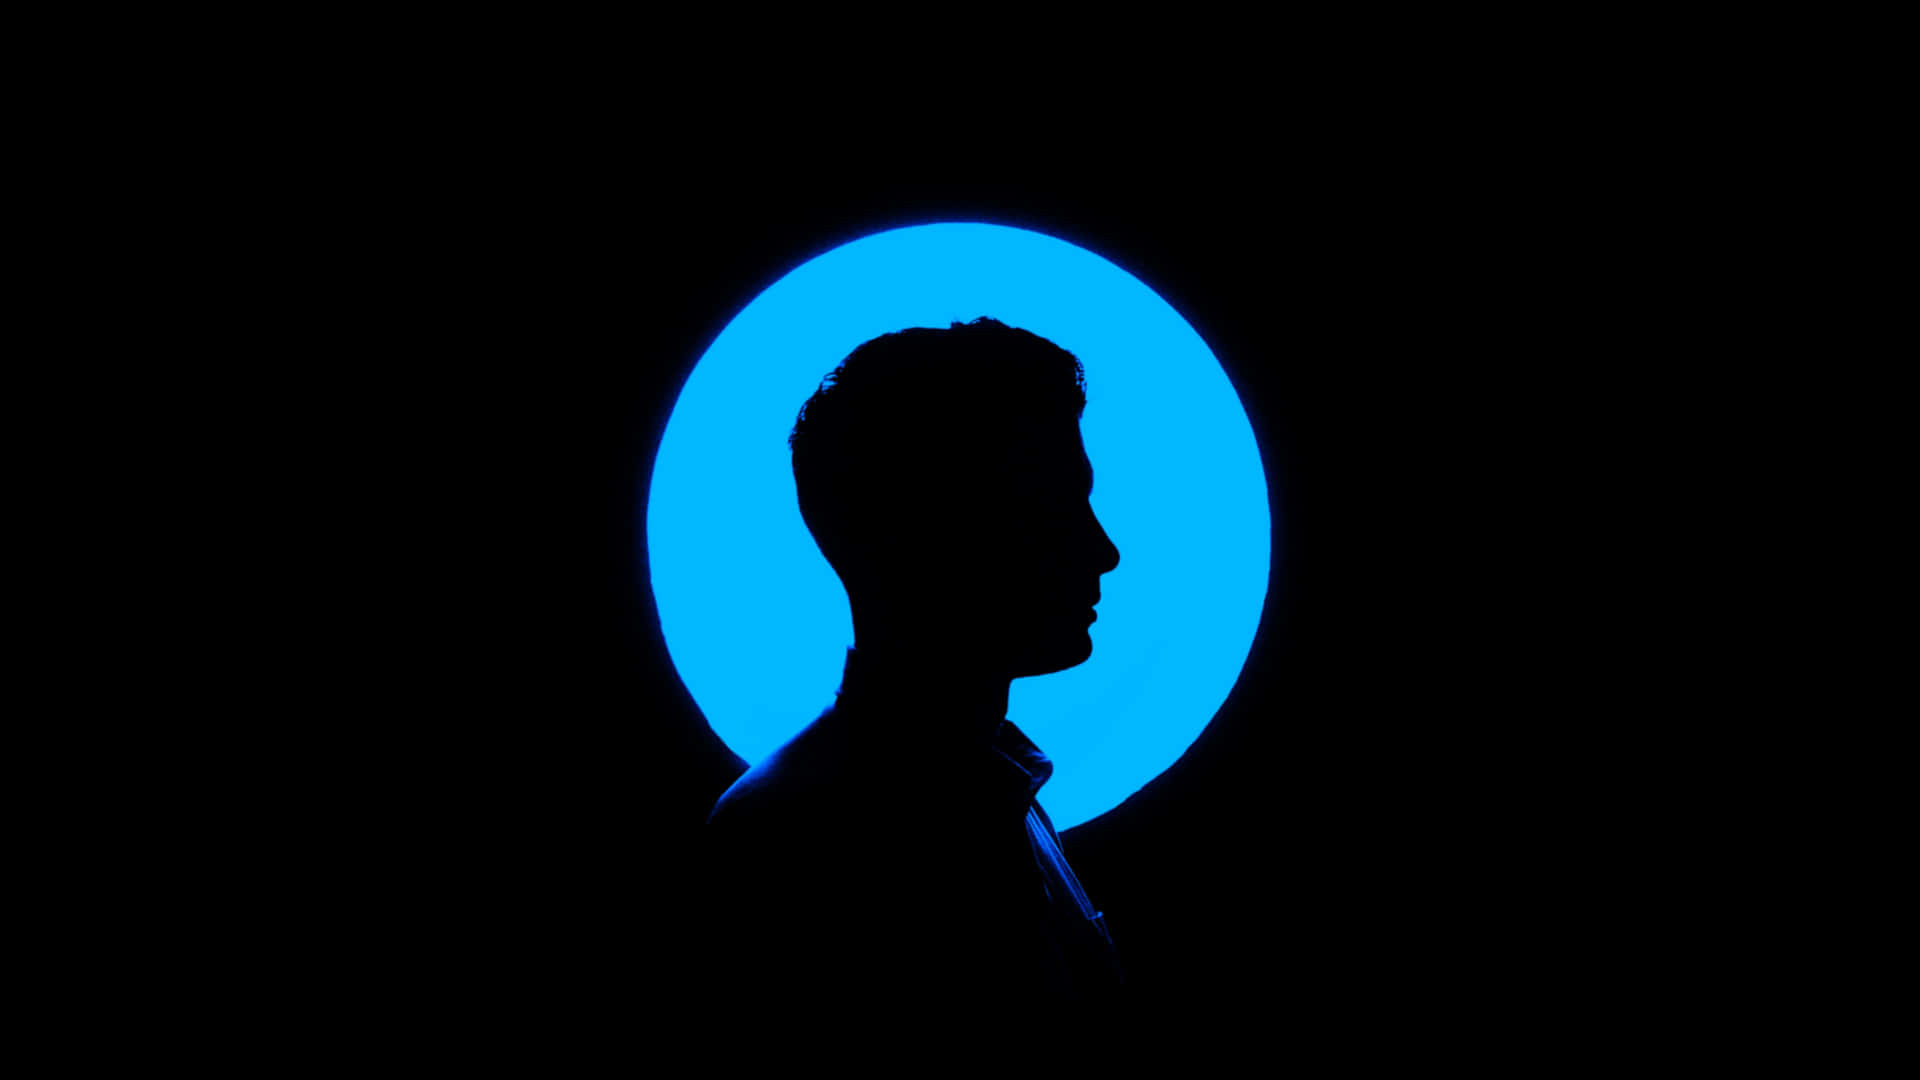 A Silhouette Of A Man In A Blue Circle